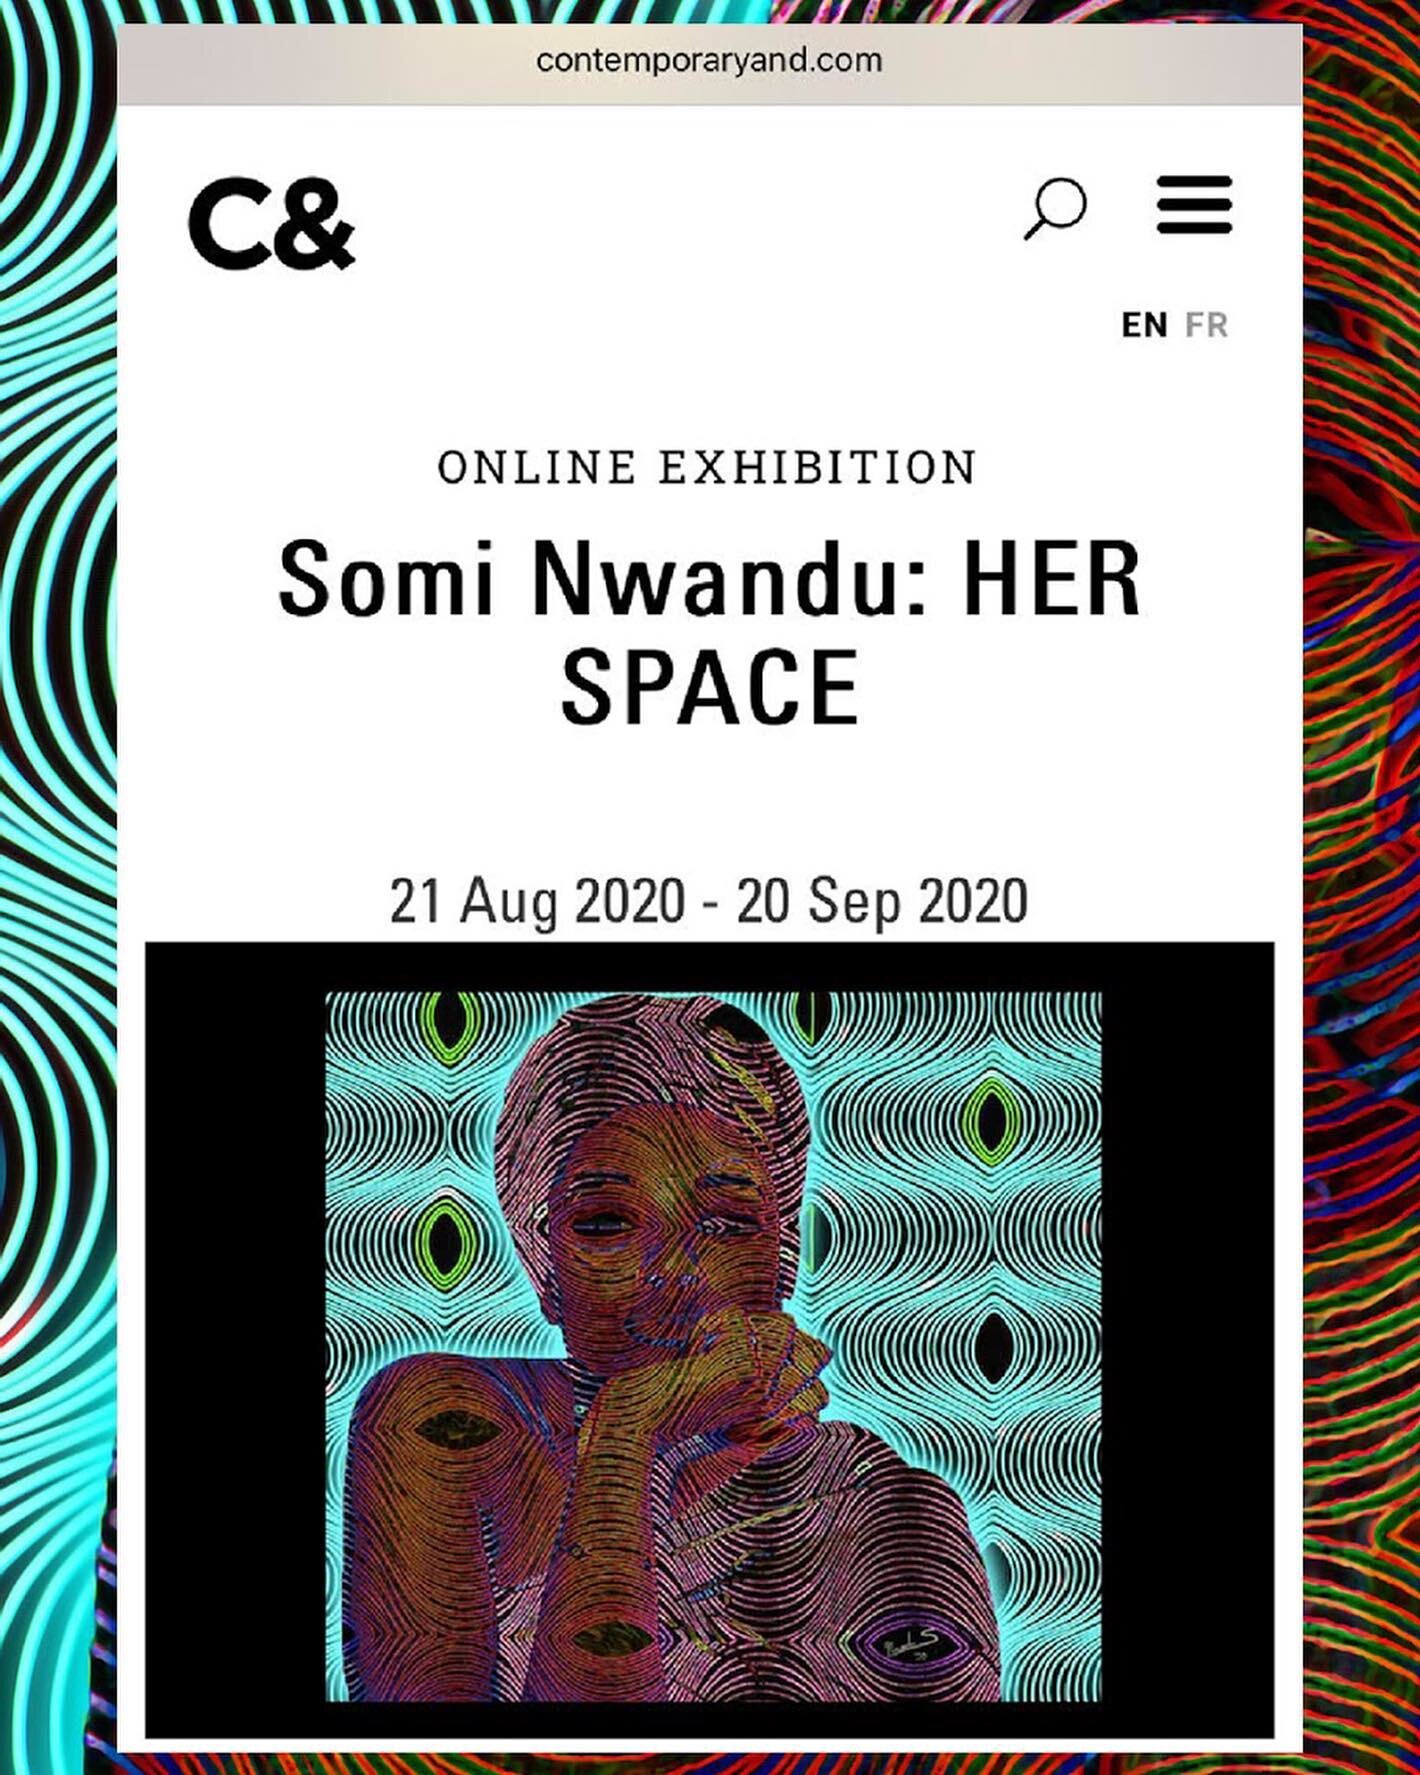 I'm honored to be recognized by Contemporary And (C&amp;) art magazine for the Her Space VR exhibition!

C&amp; is an art platform and dynamic space focusing on African and its Global Diasporic perspectives. Thank you so much @contemporaryand for the